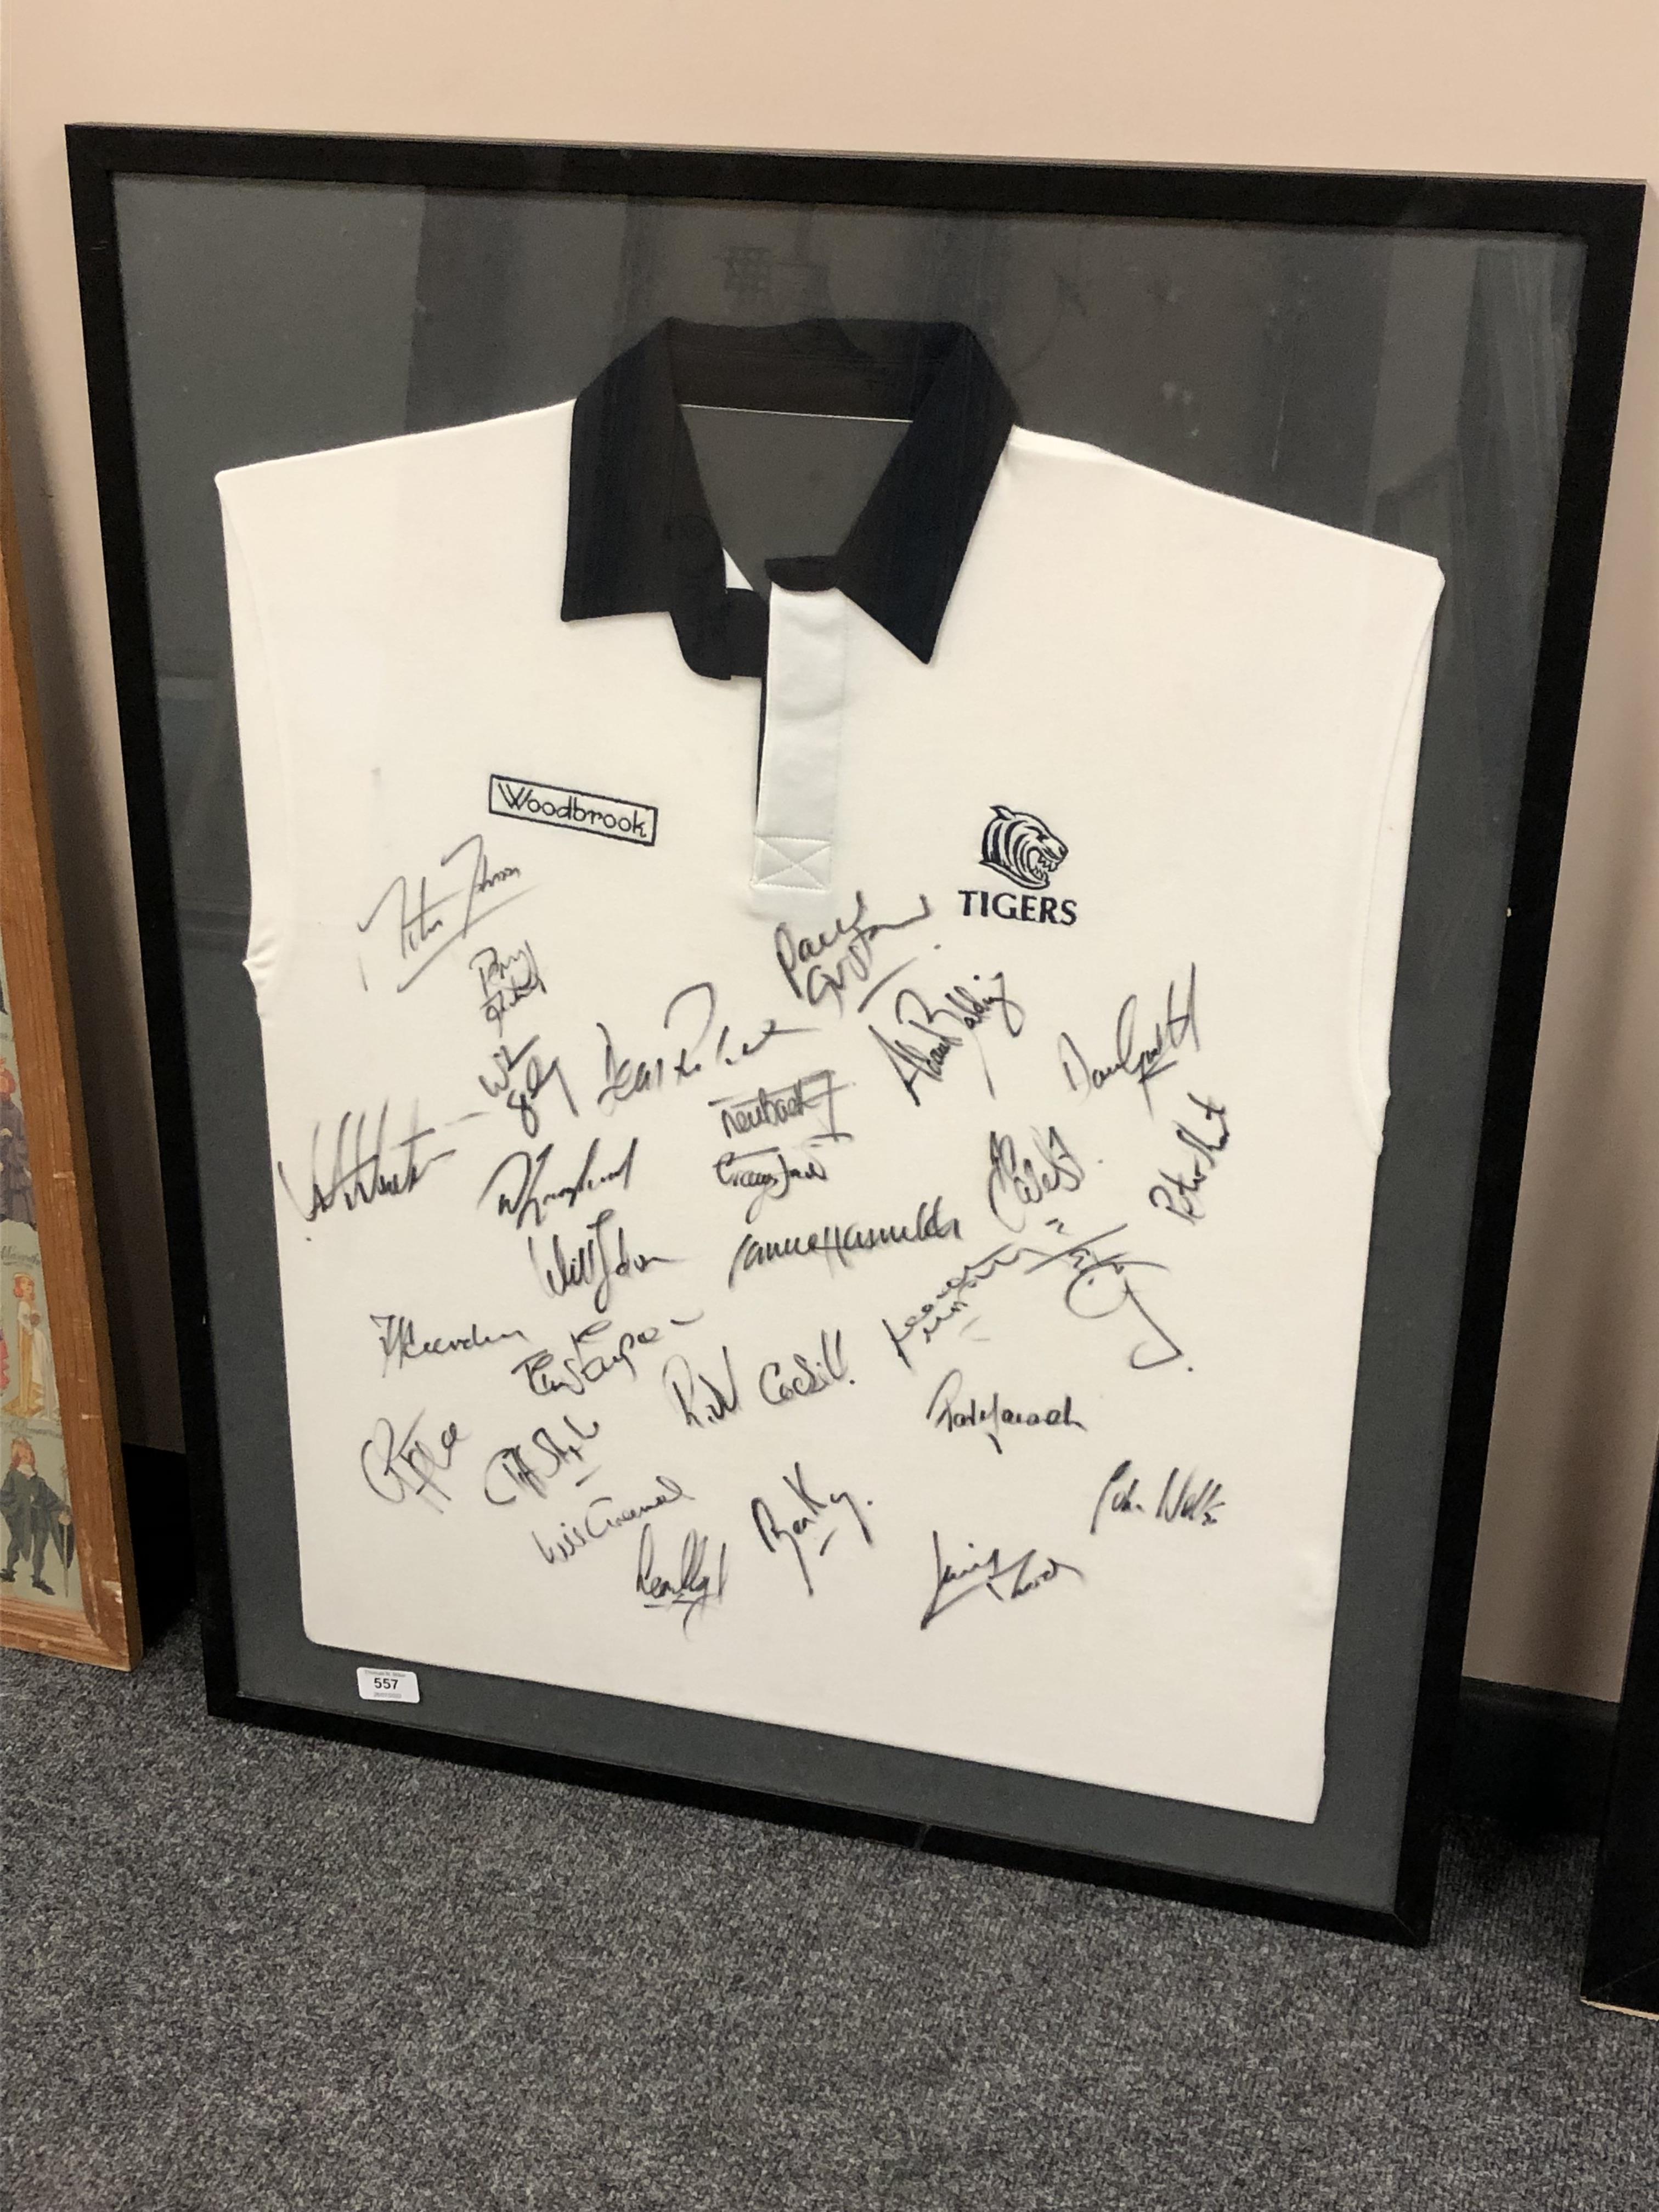 A framed signed rugby shirt : Leicester Tigers